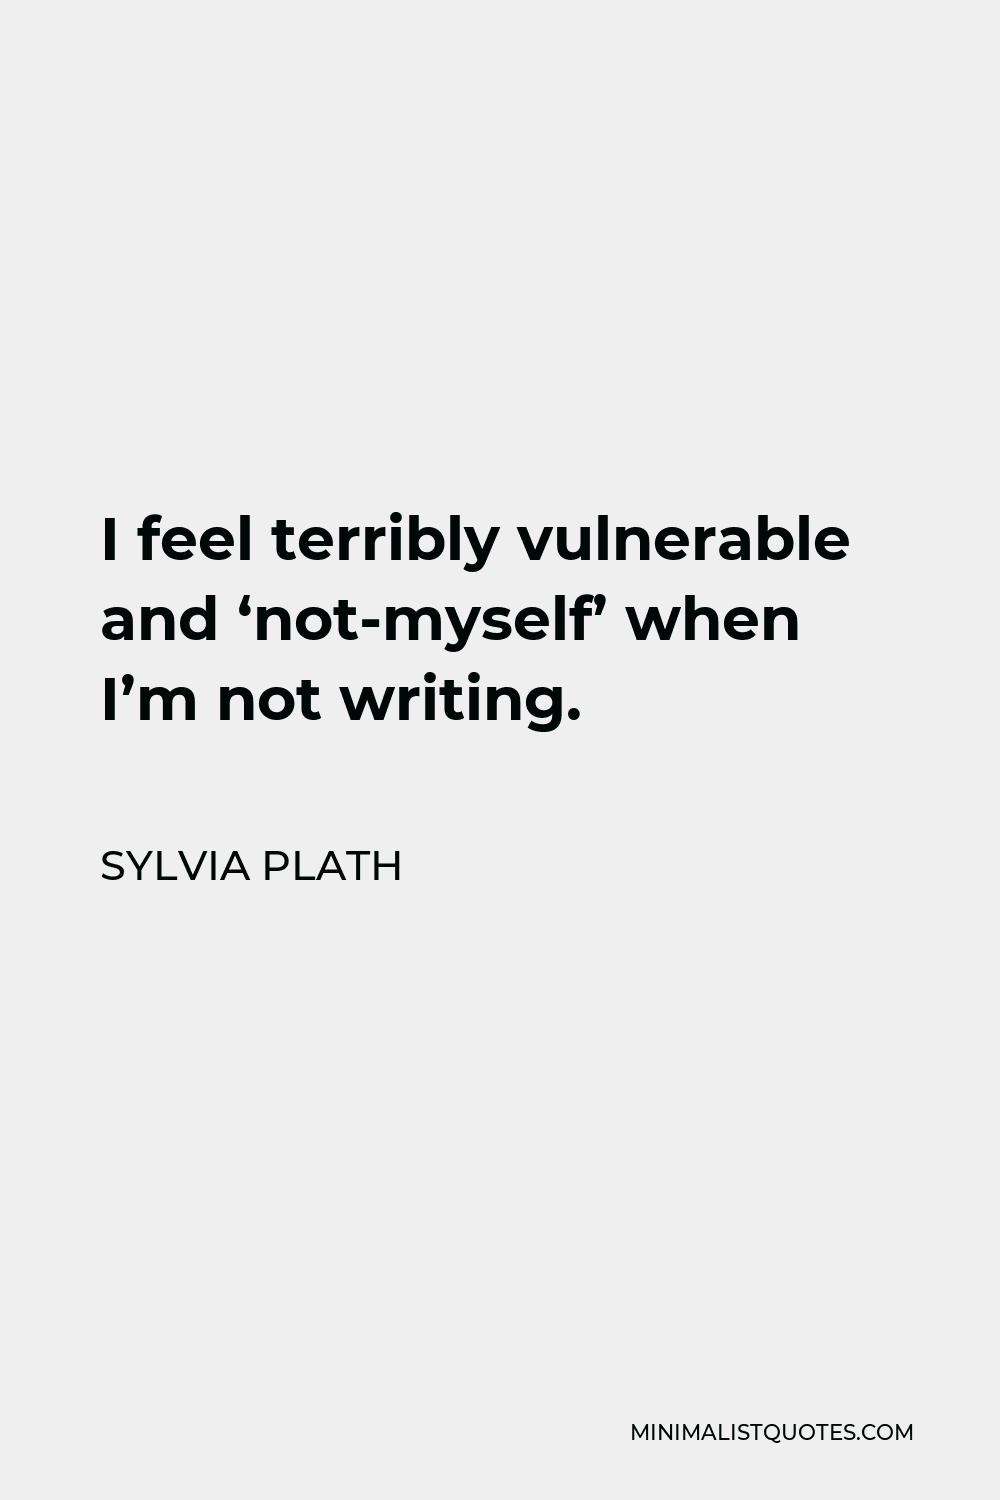 Sylvia Plath Quote - I feel terribly vulnerable and ‘not-myself’ when I’m not writing.